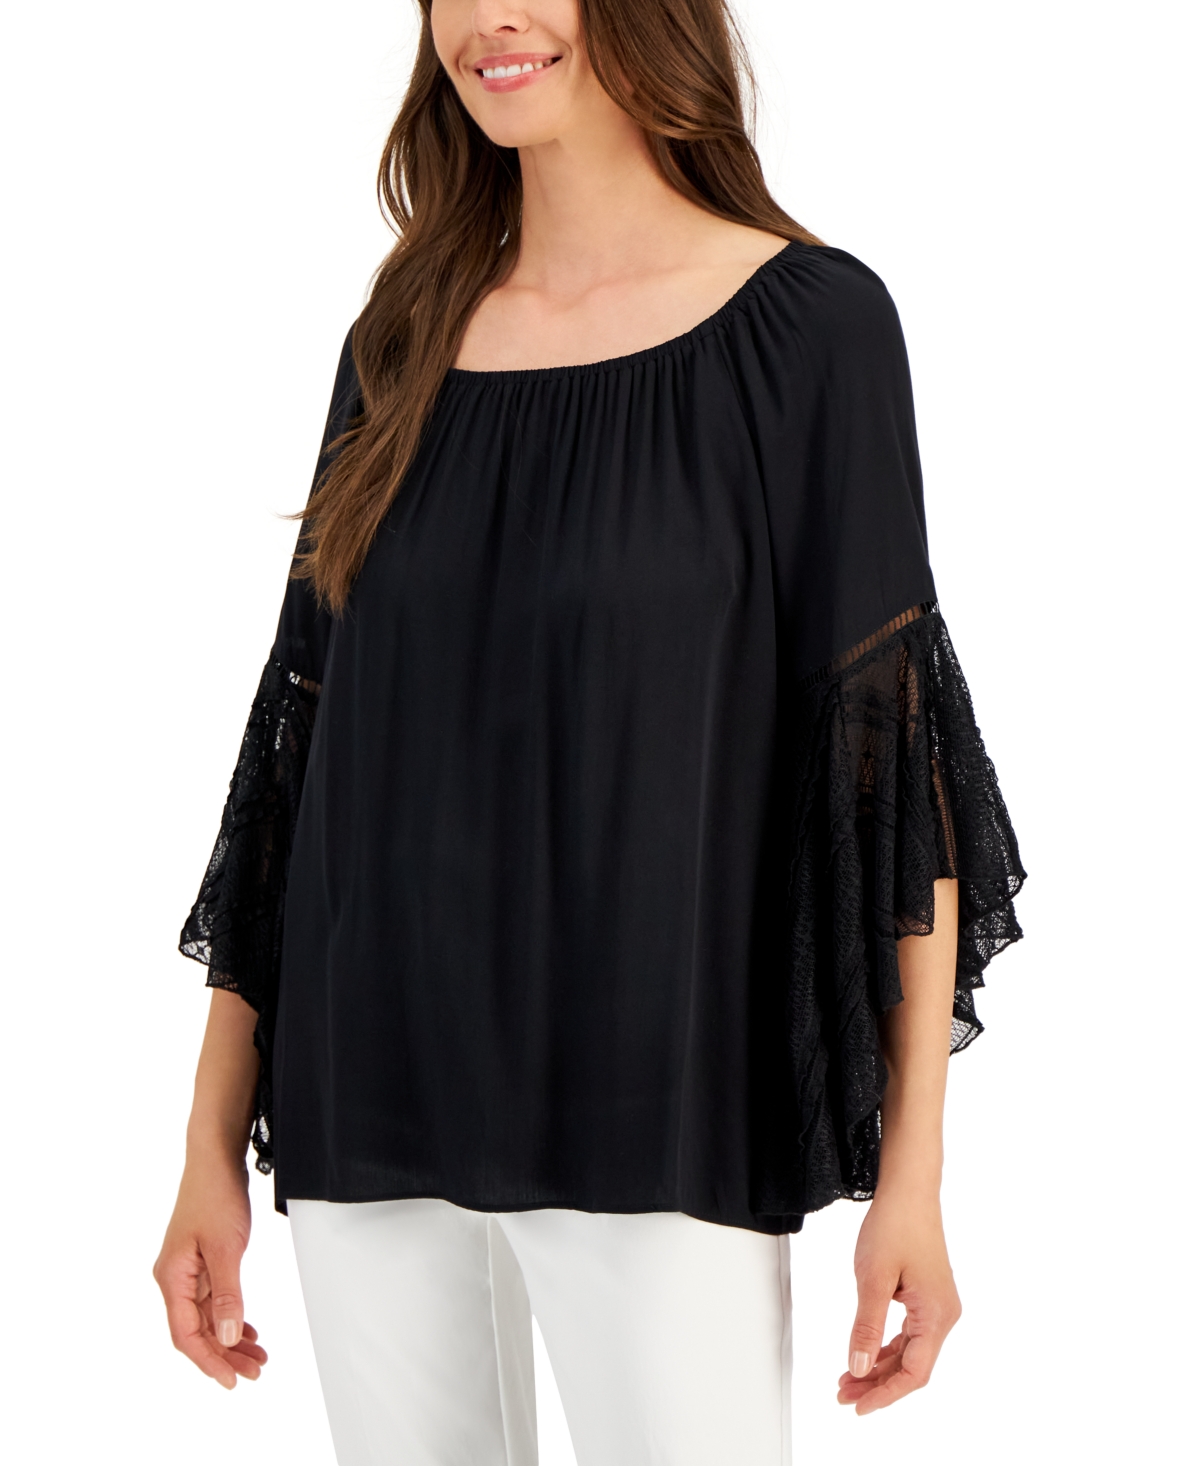 Fever Women's On & Off-the-Shoulder Lace Bell Sleeve Top